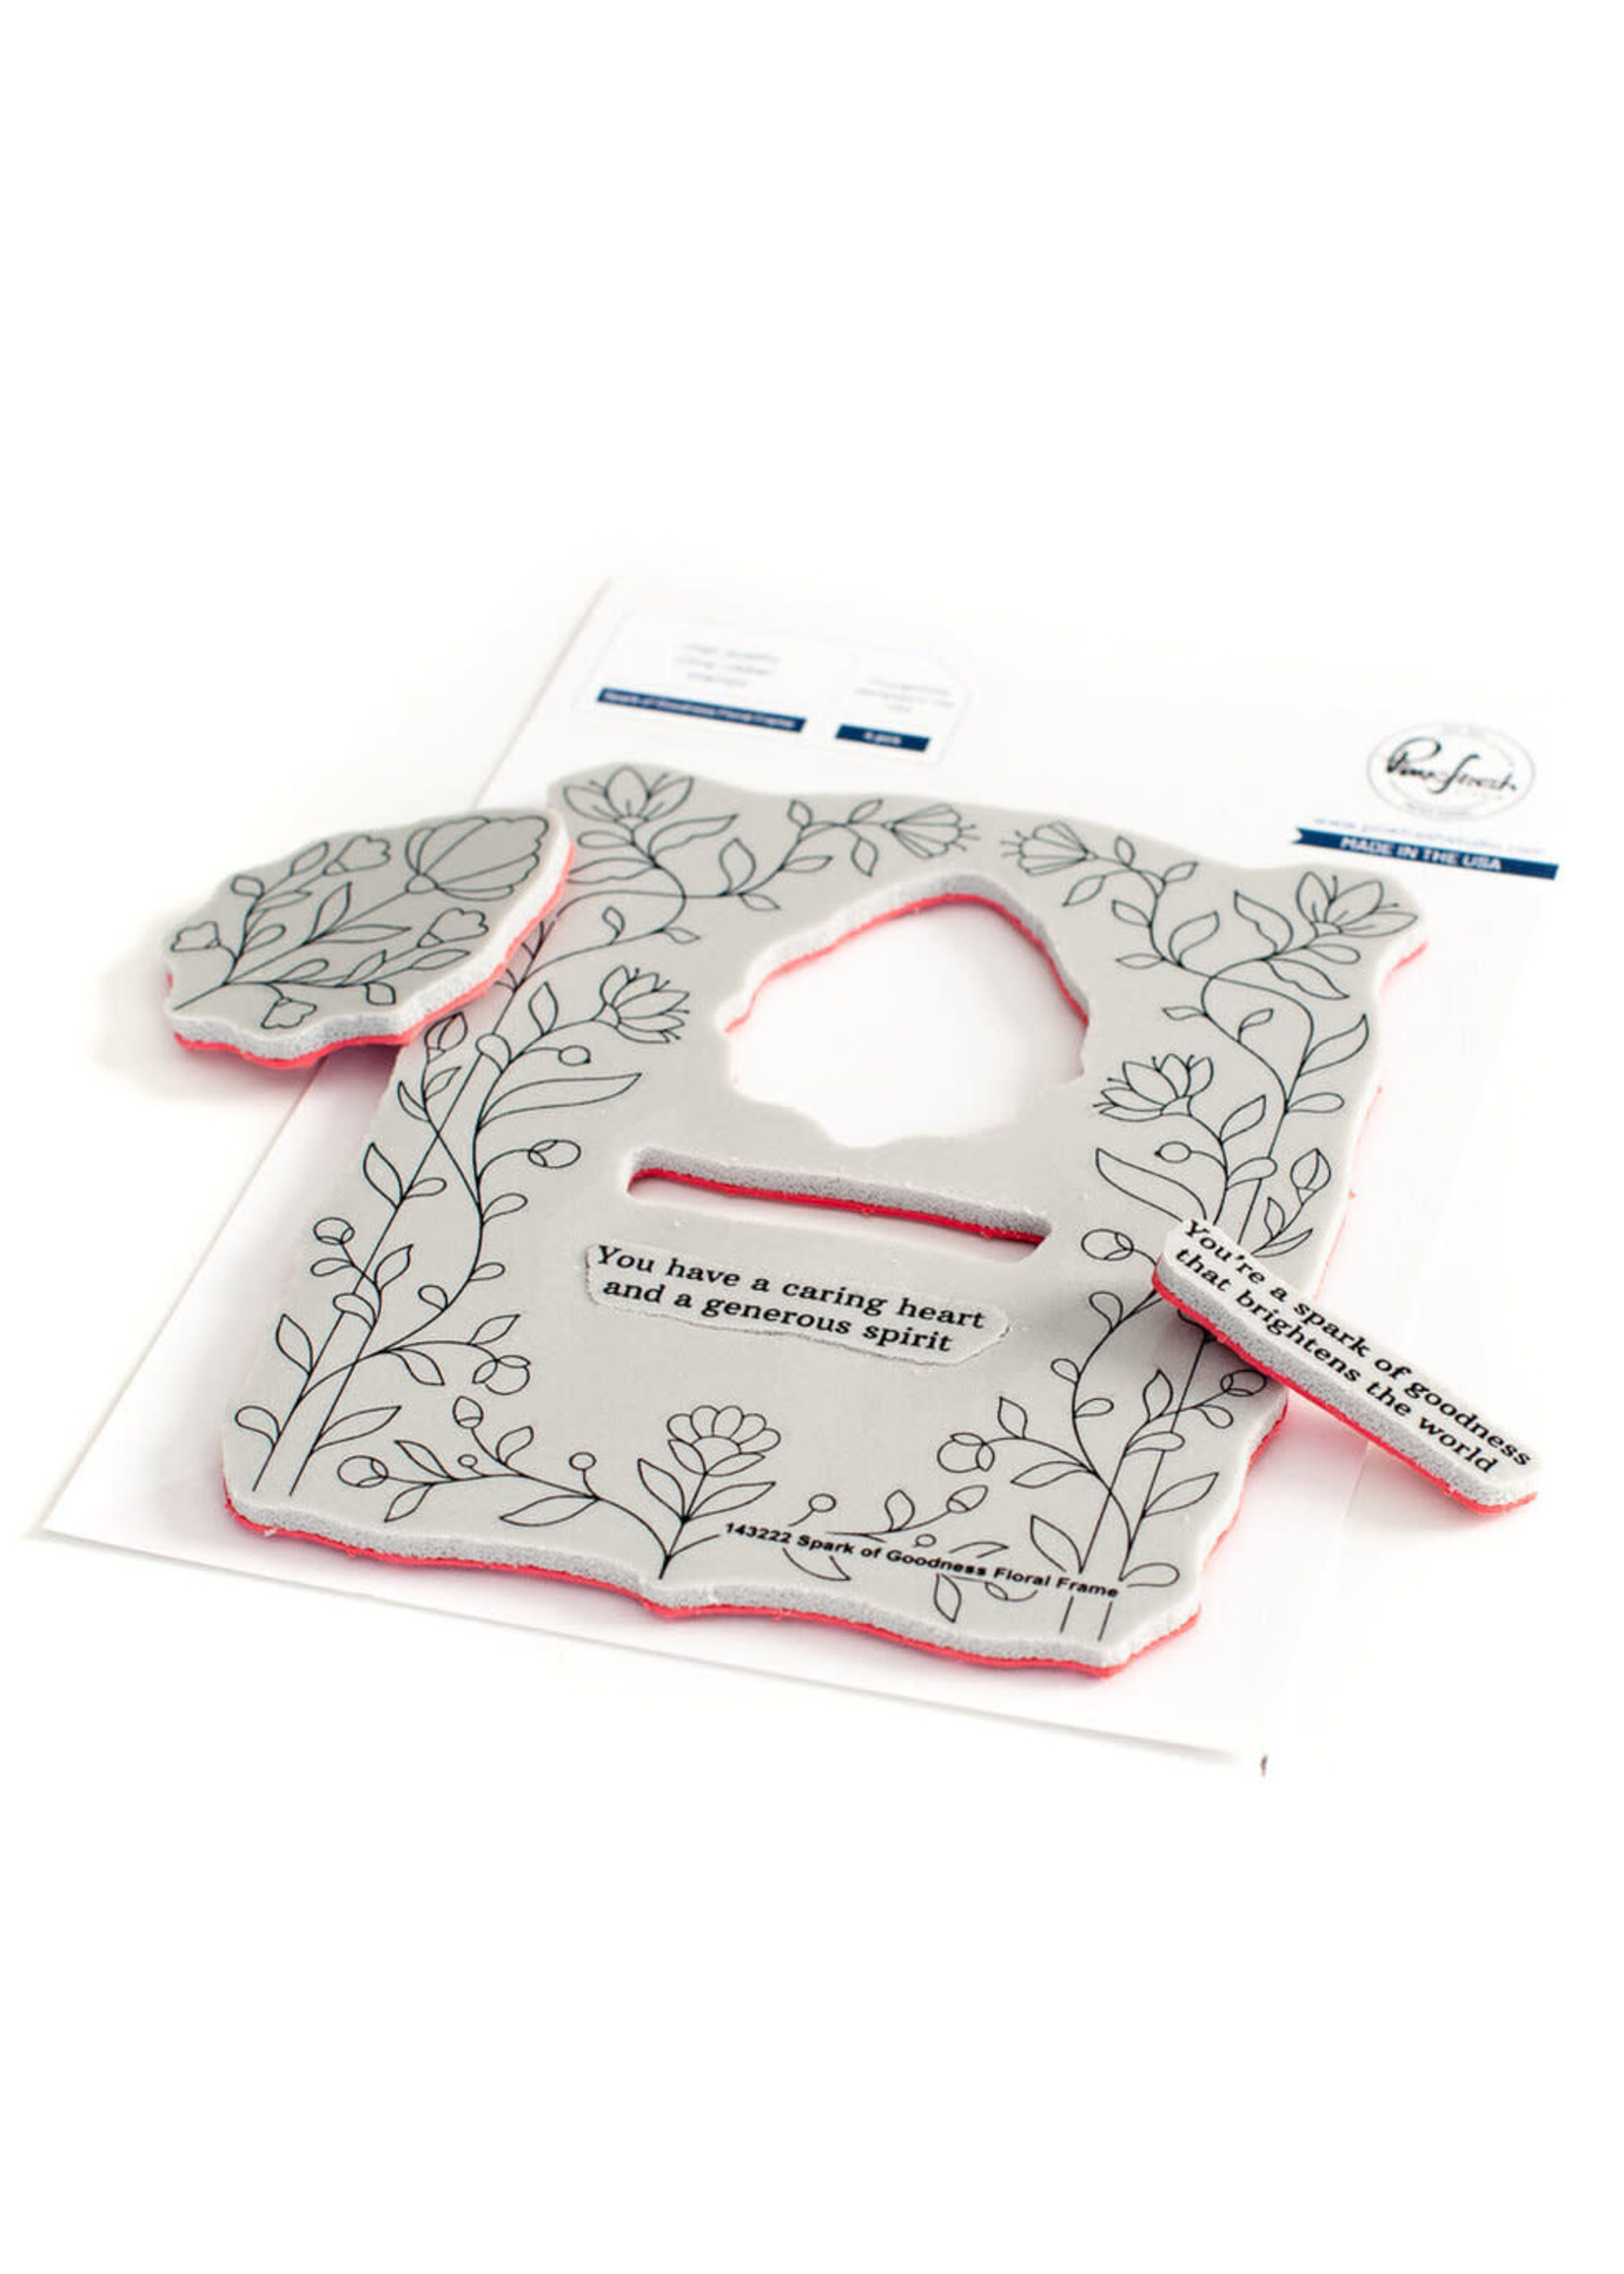 PinkFresh Studios Spark of Goodness cling stamp